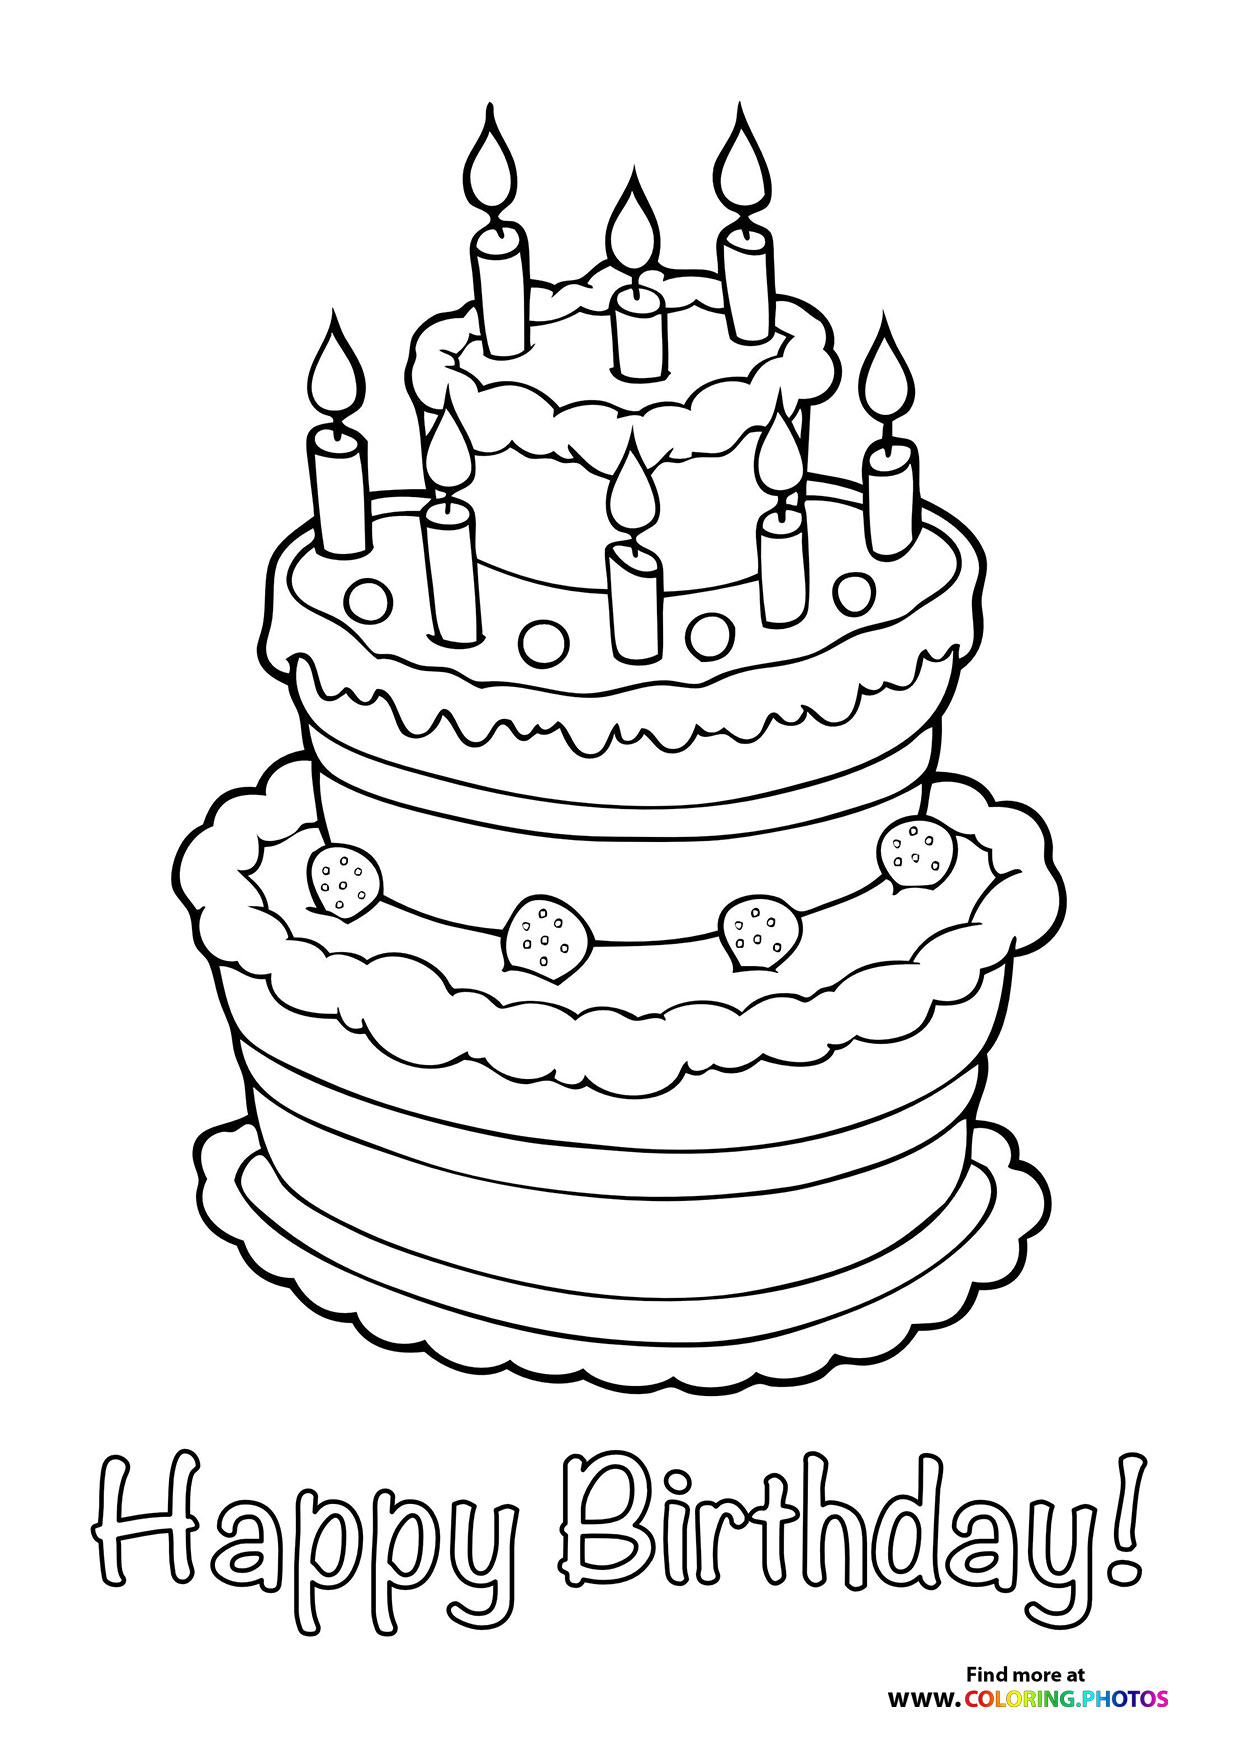 Learn Colors for Kids and Color Heart Rainbow Wedding Cake Coloring Pages -  YouTube